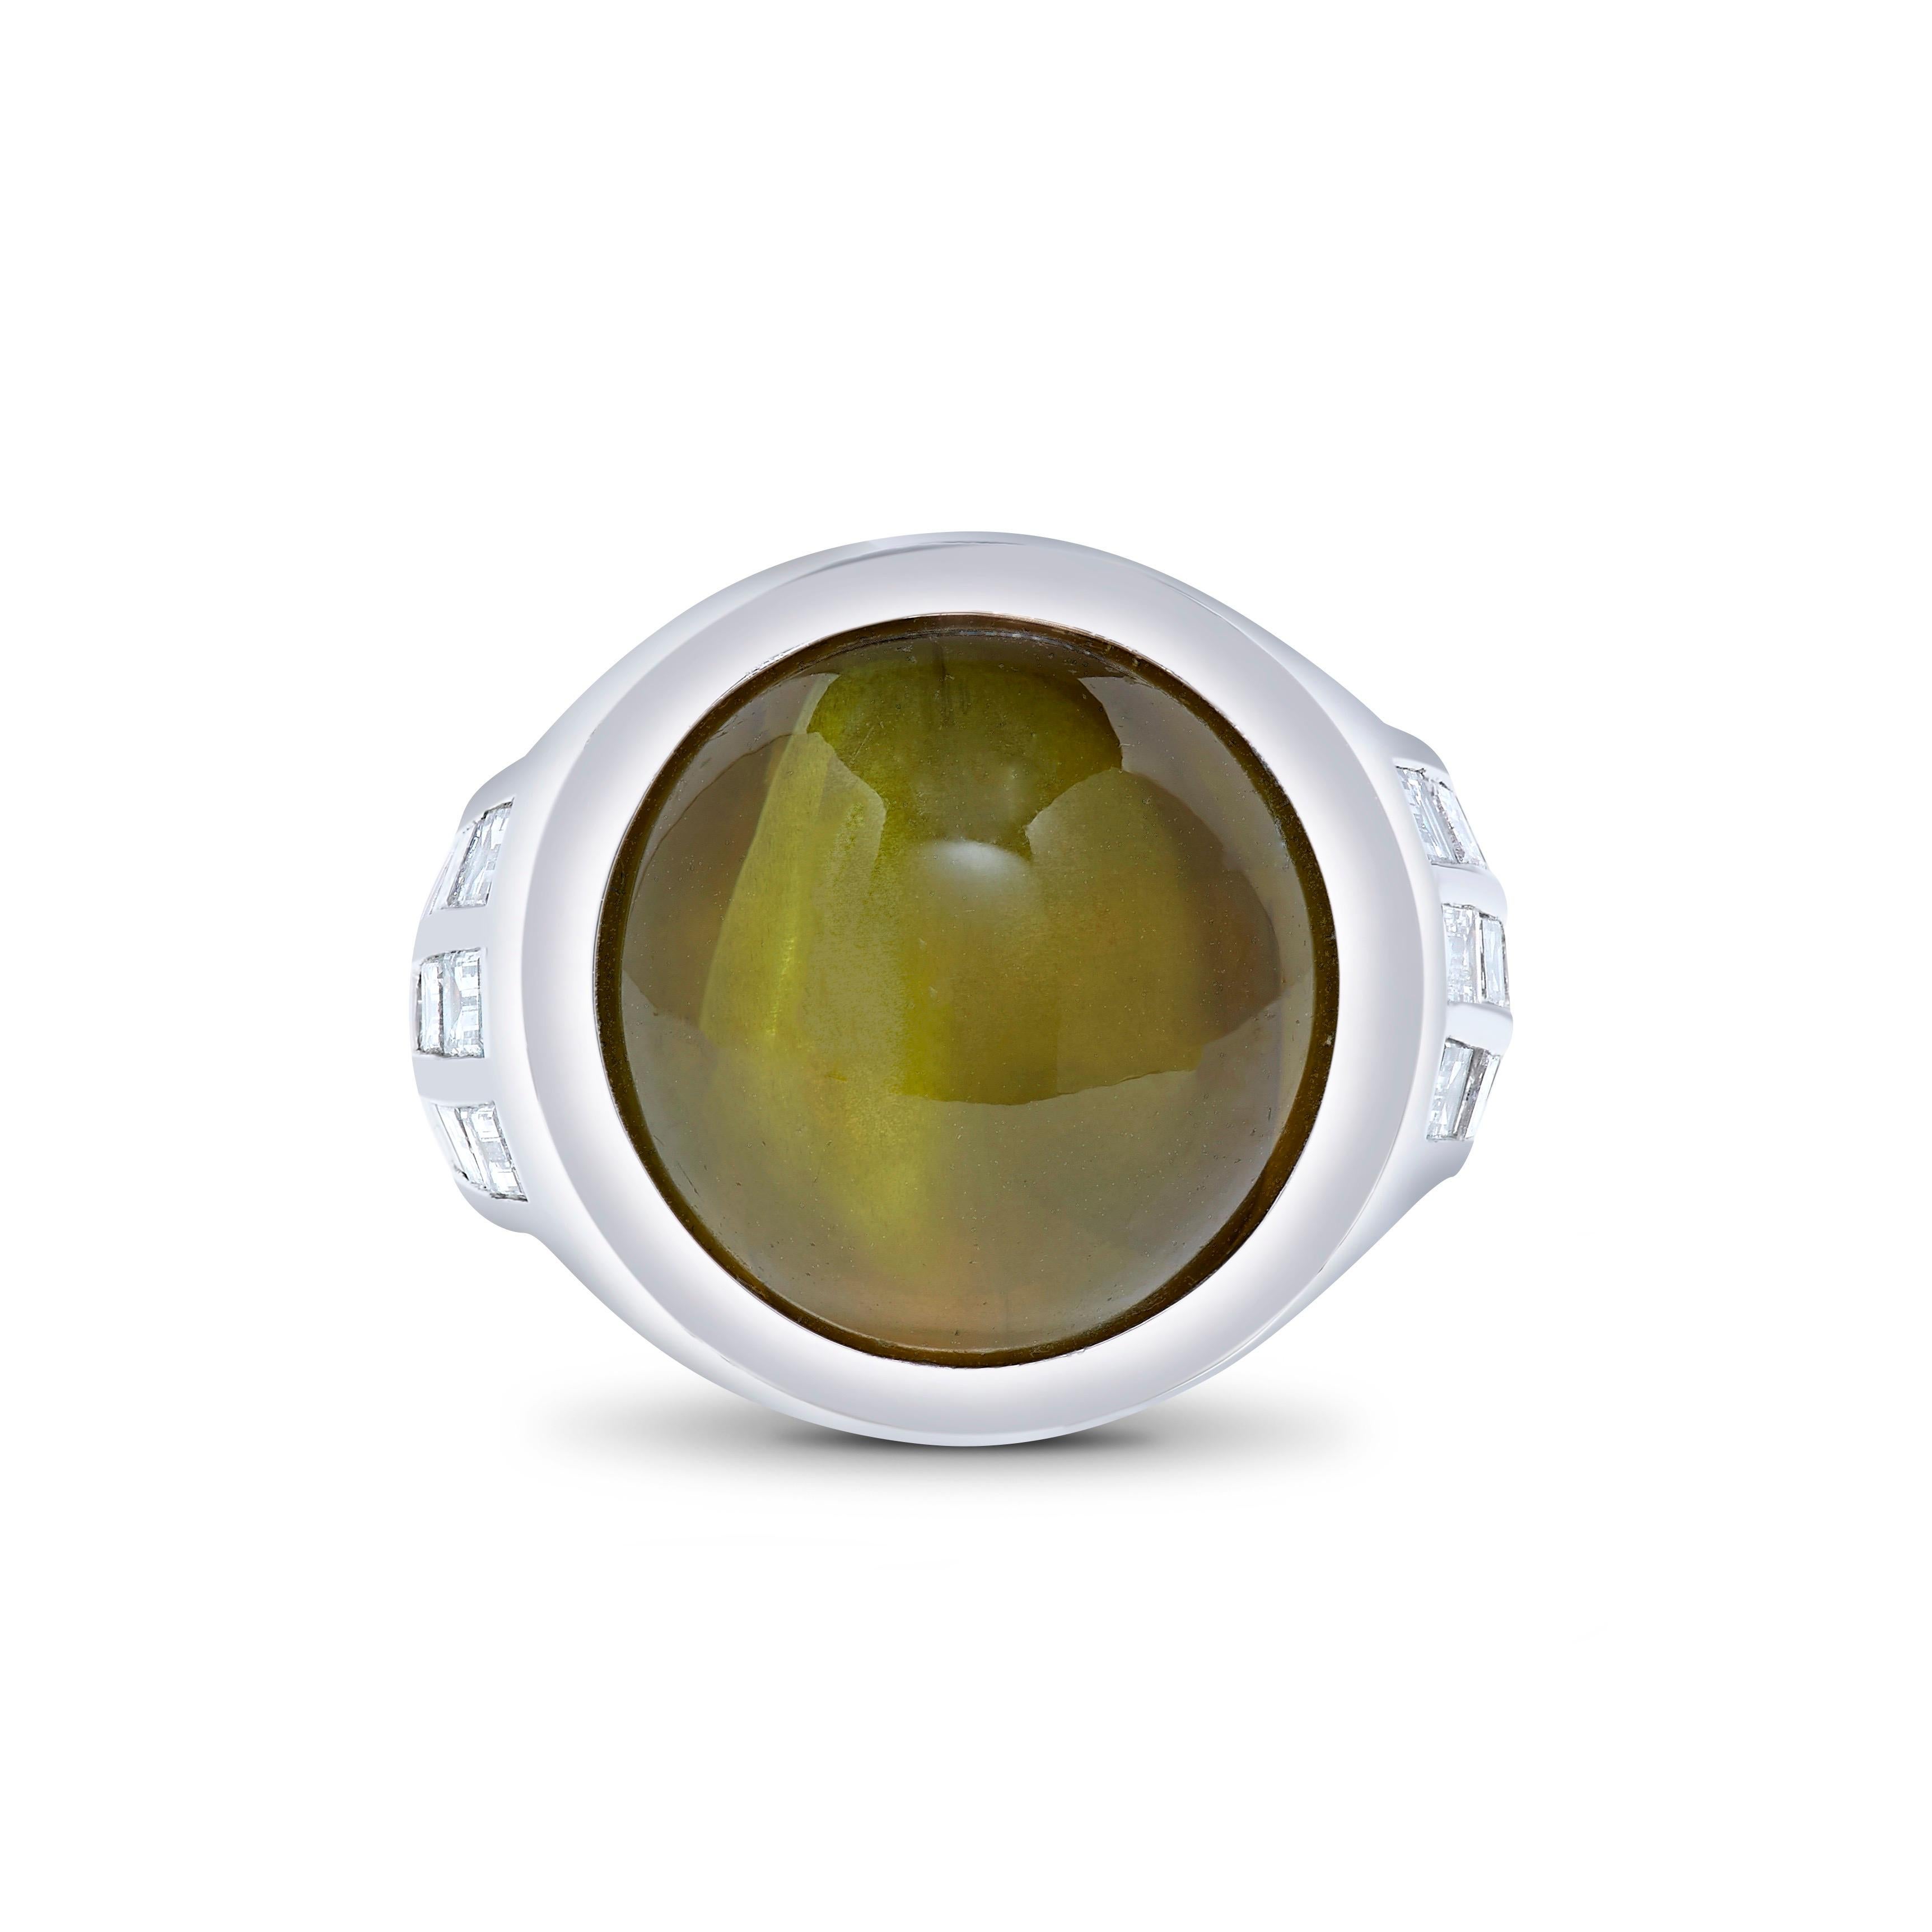 From the vault at Emilio Jewelry New York,
Featuring a super fine rare cats Eye weighing 48.85 carats.  An additional 1.43cts of diamonds make up this simple yet striking ring. Please inquire for details. 
